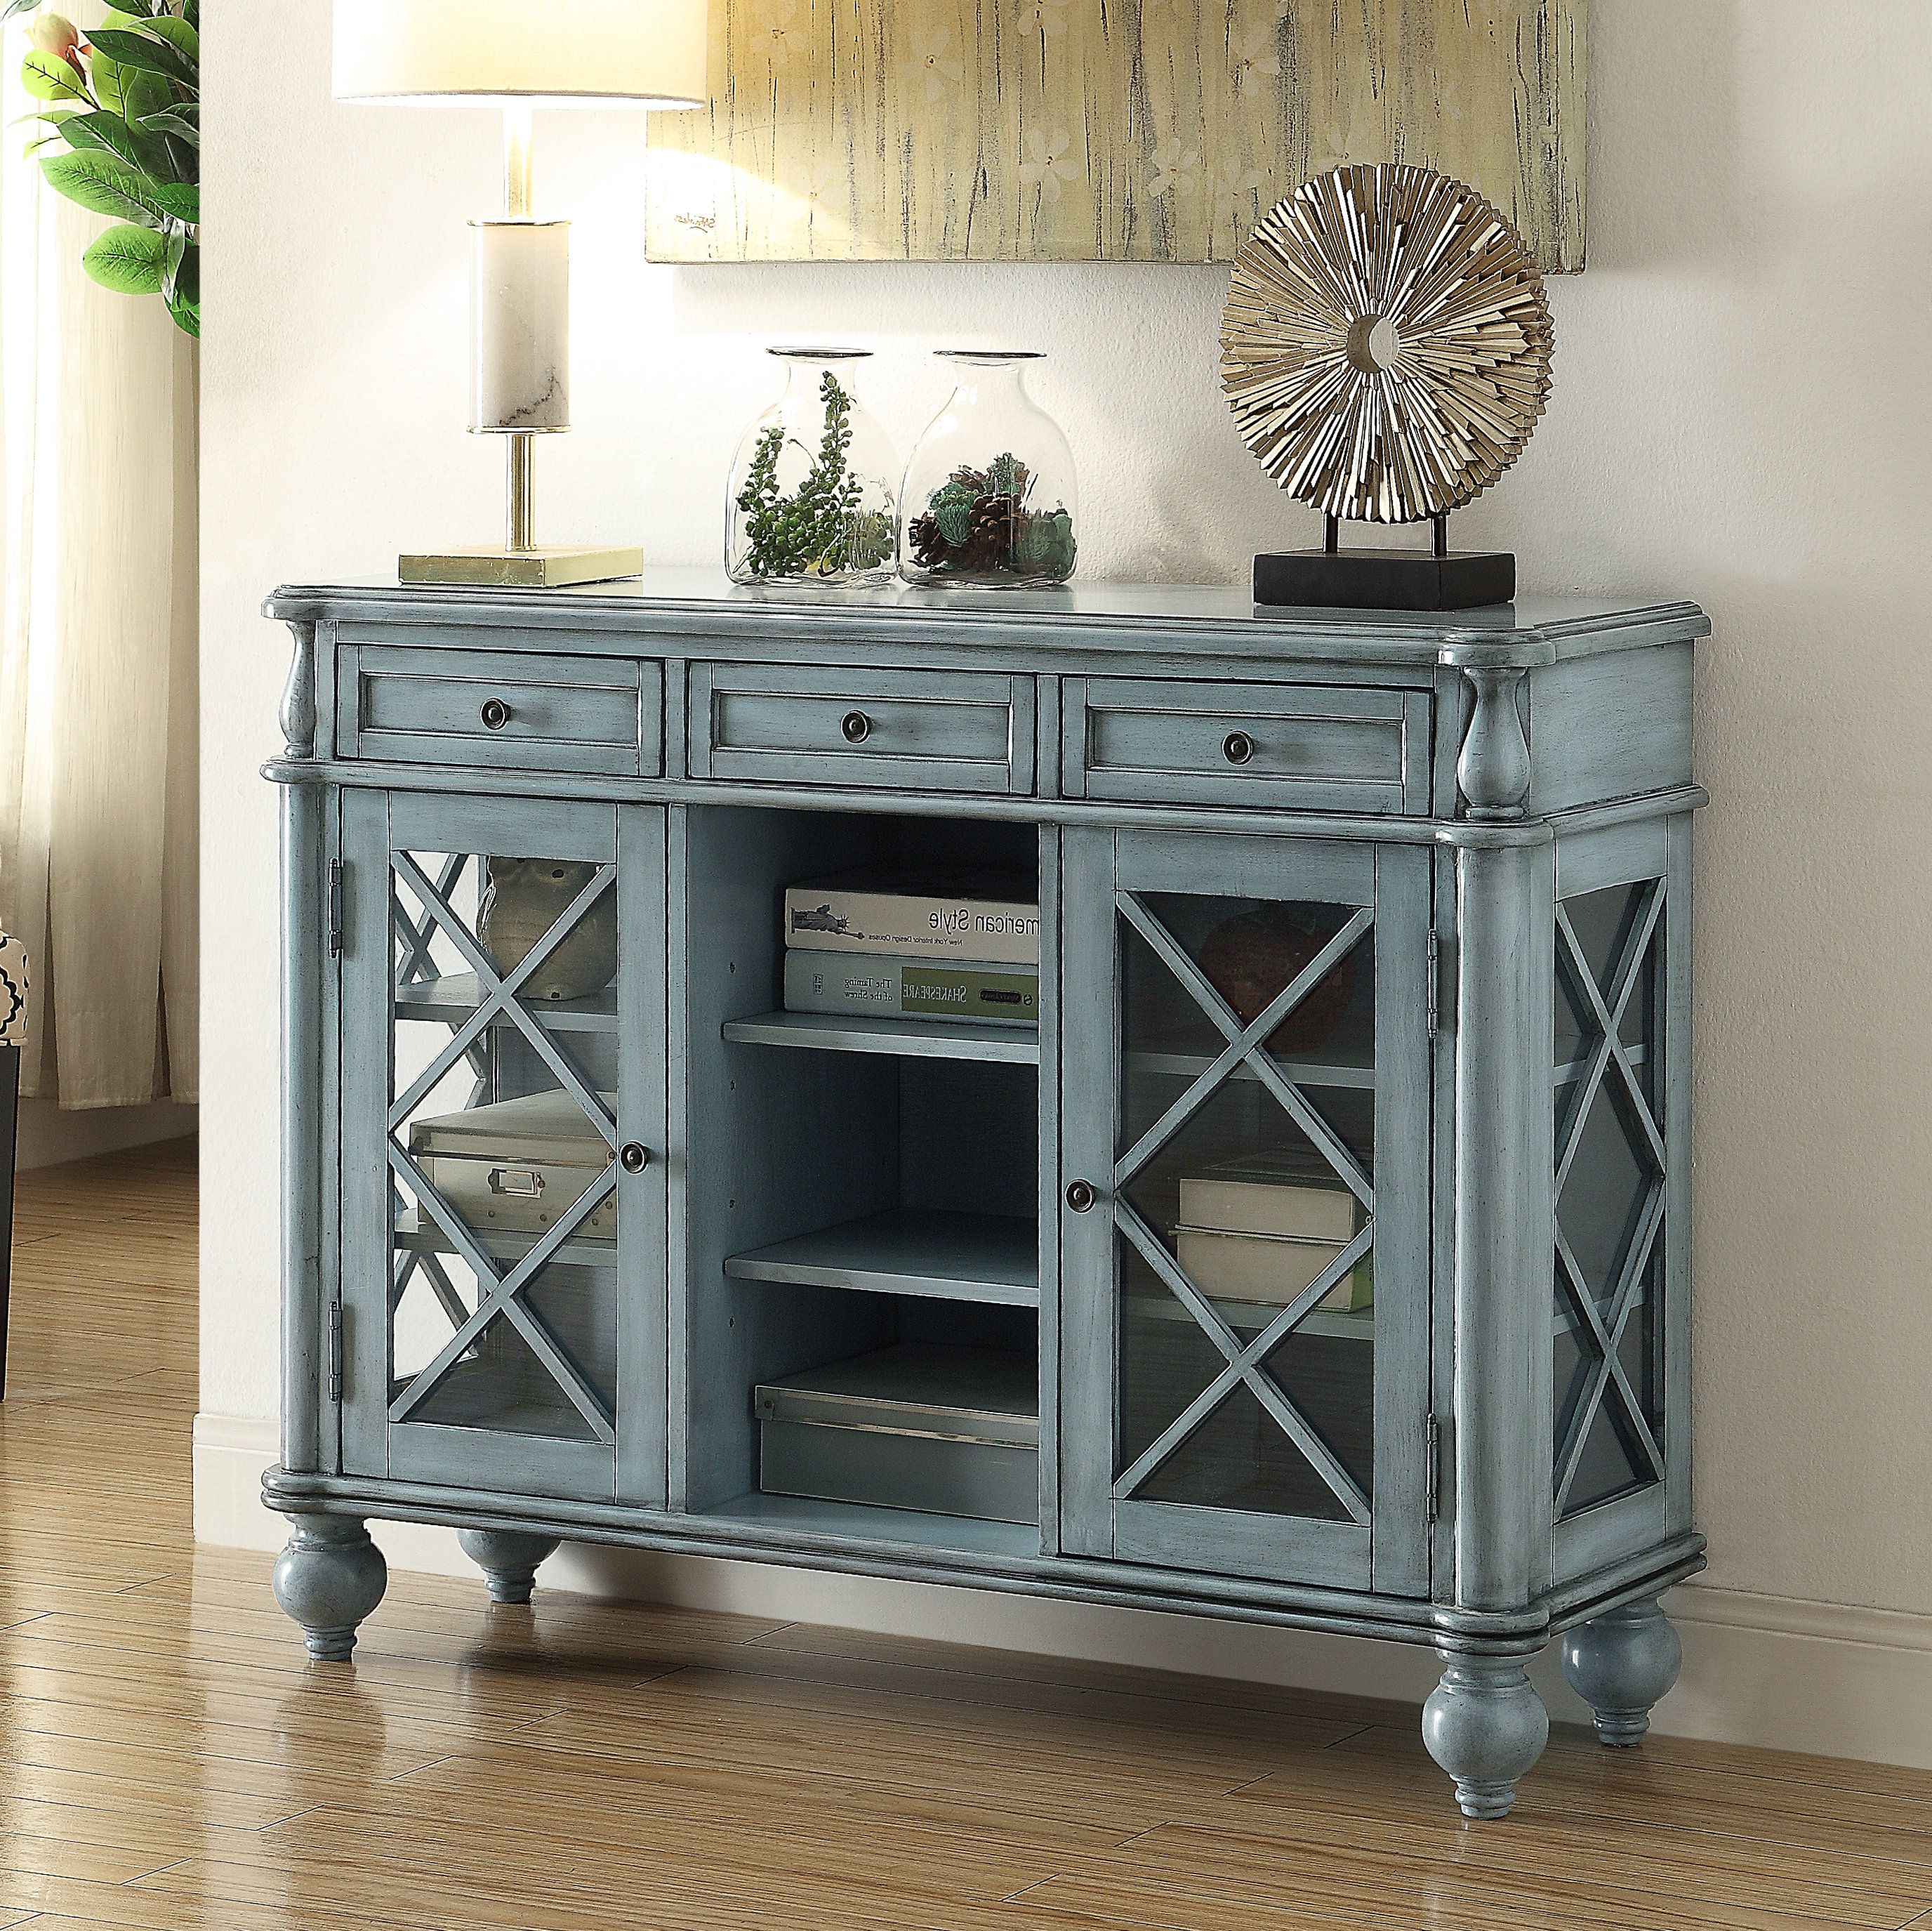 Sideboards & Buffet Tables You'll Love In 2019 | Wayfair Within Raquette Sideboards (Gallery 9 of 20)